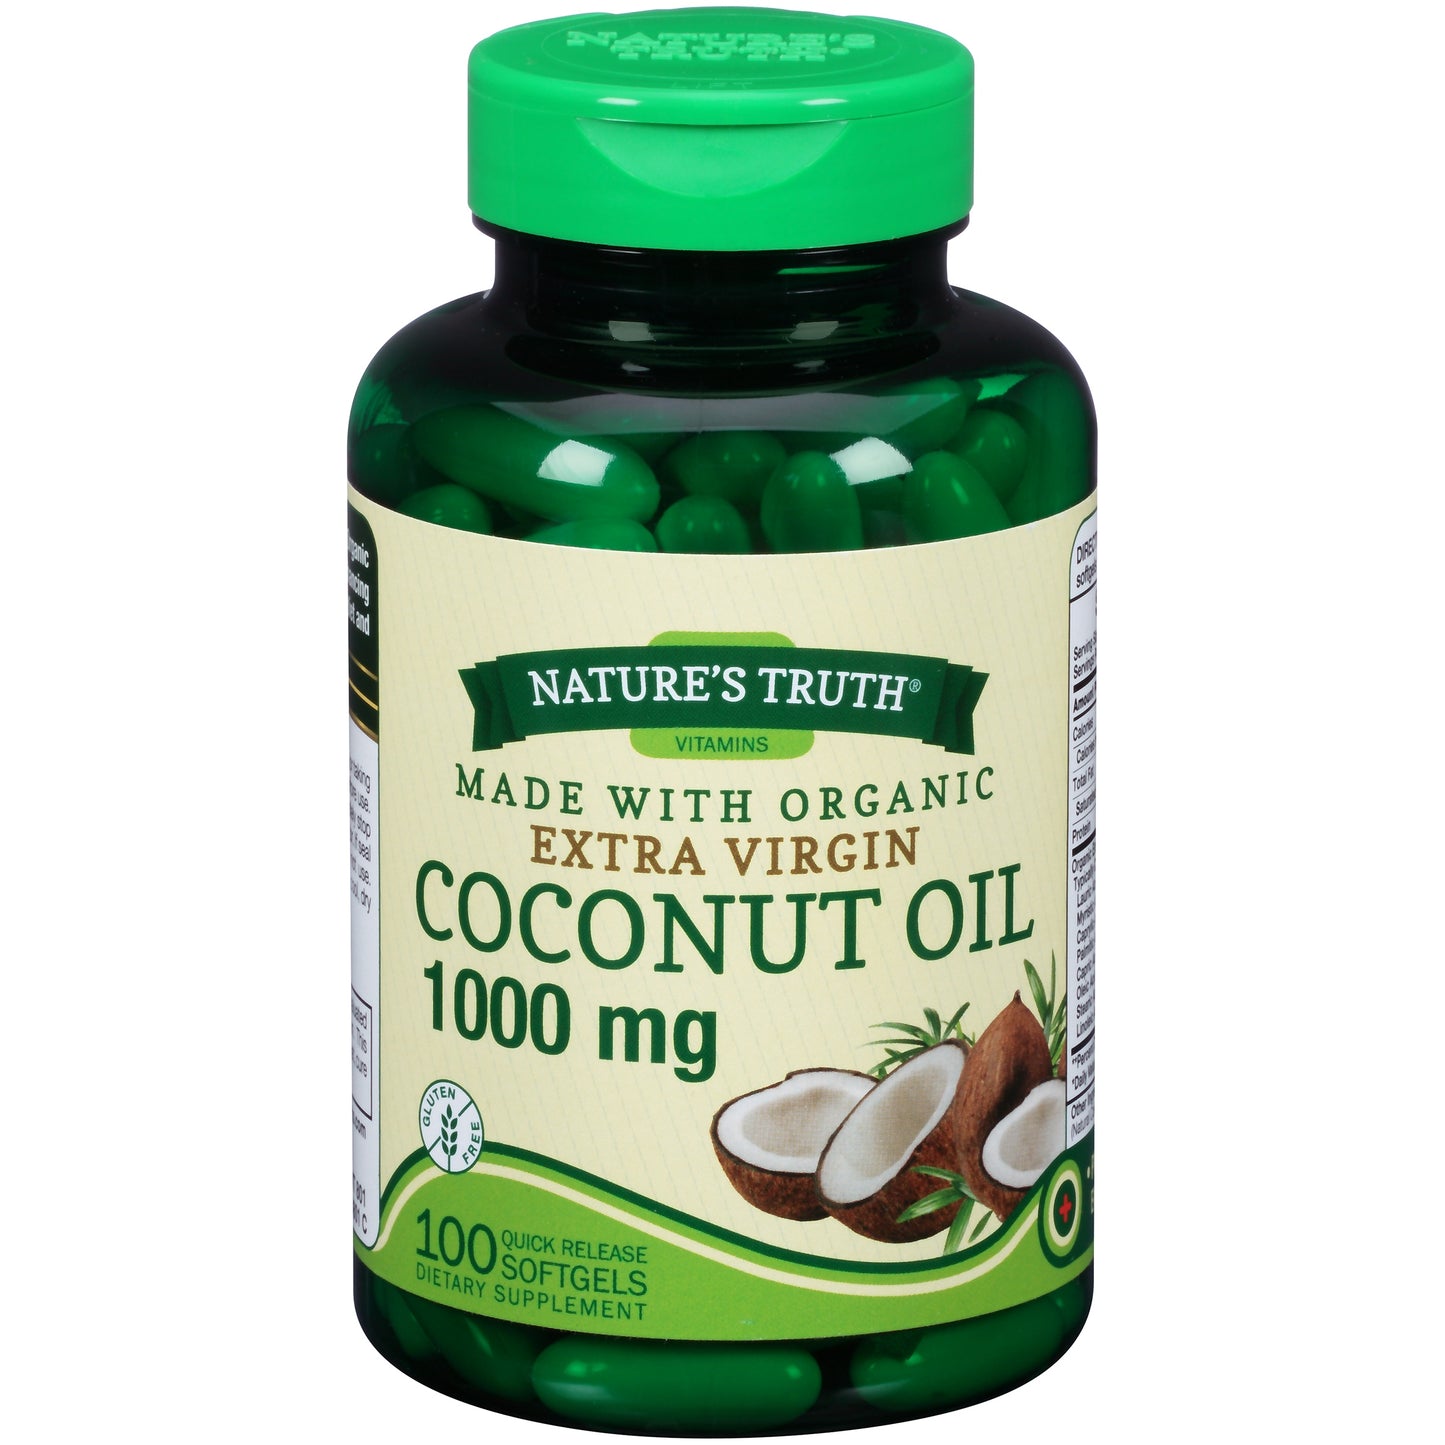 NATURE’S TRUTH COCONUT OIL 1000MG, 100 SOFTGELS